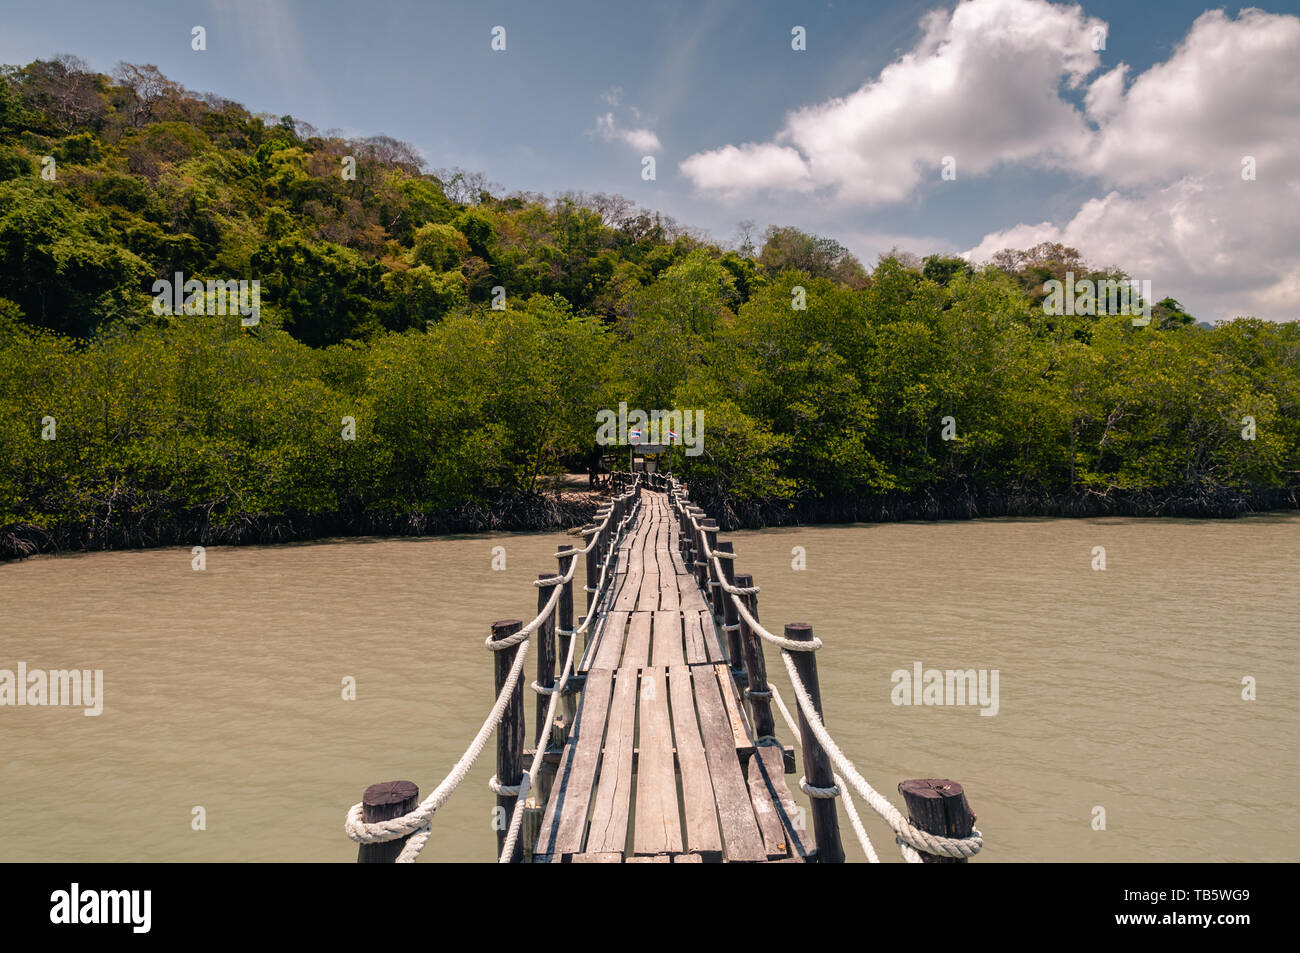 Wooden pier and thai long tail boats in Talet bay at Nakhon Si Thammarat province of Thailand. Stock Photo